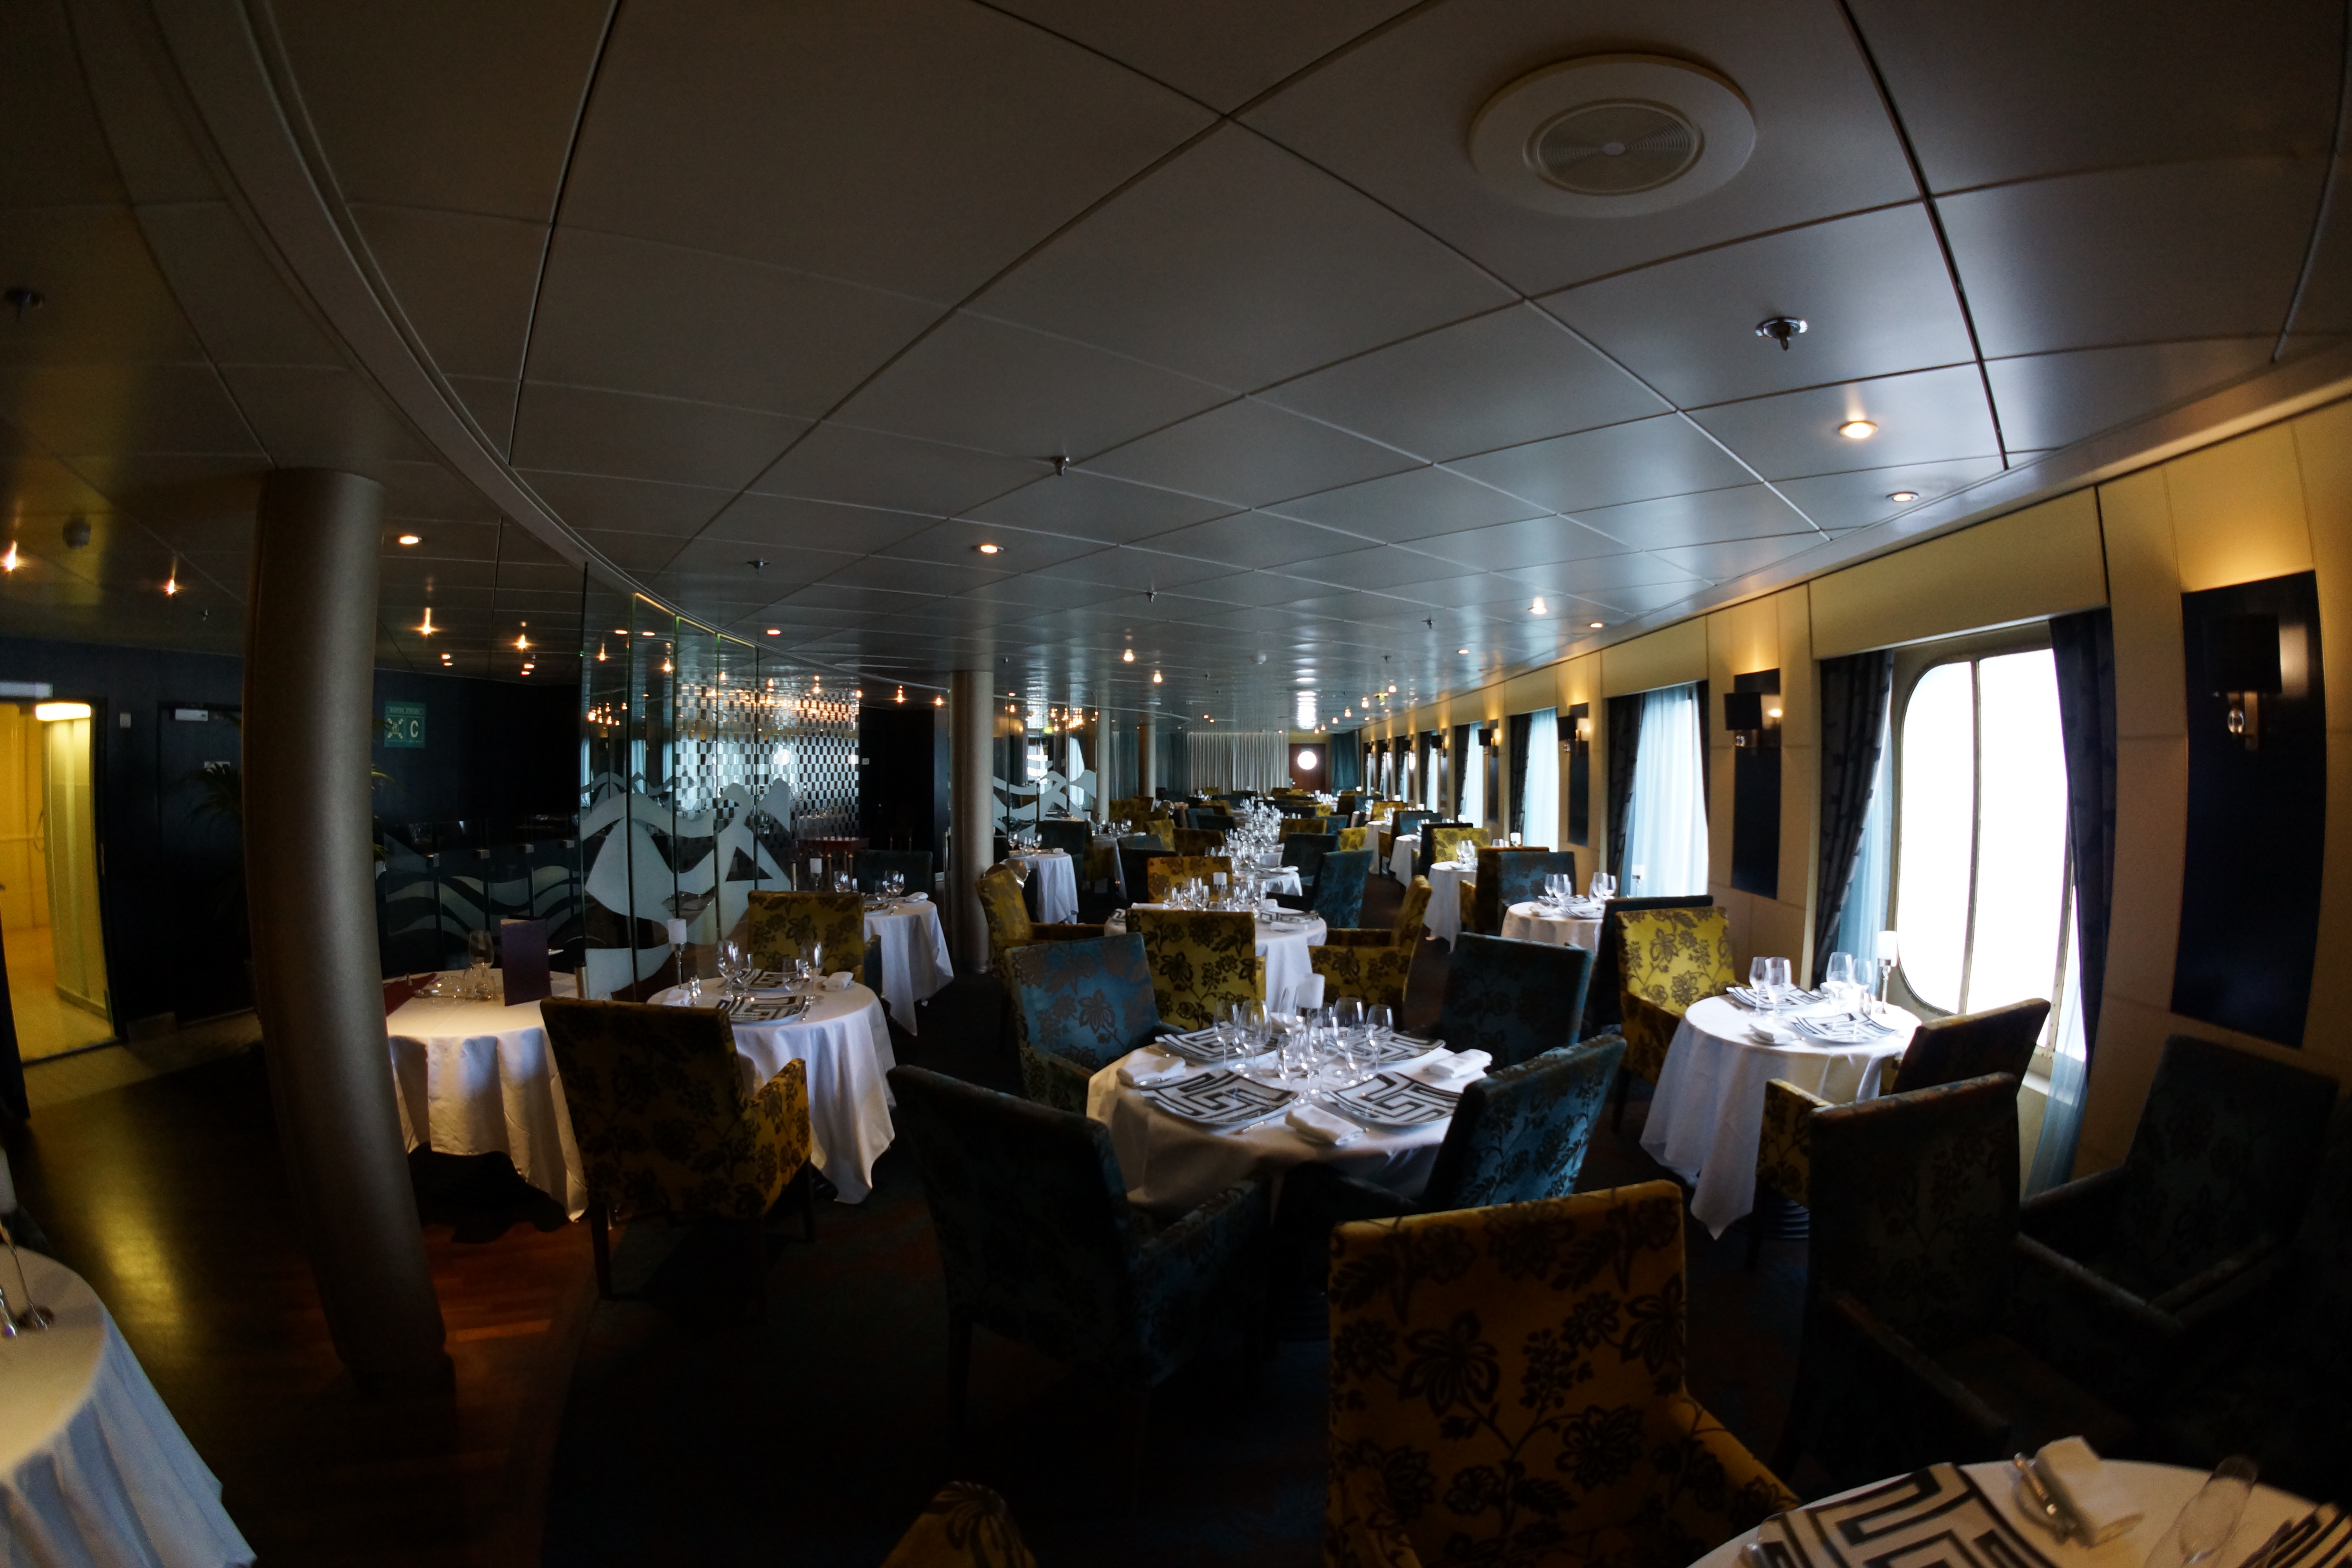 2014 South America Cruise Day 5 – Dinner in Singatures